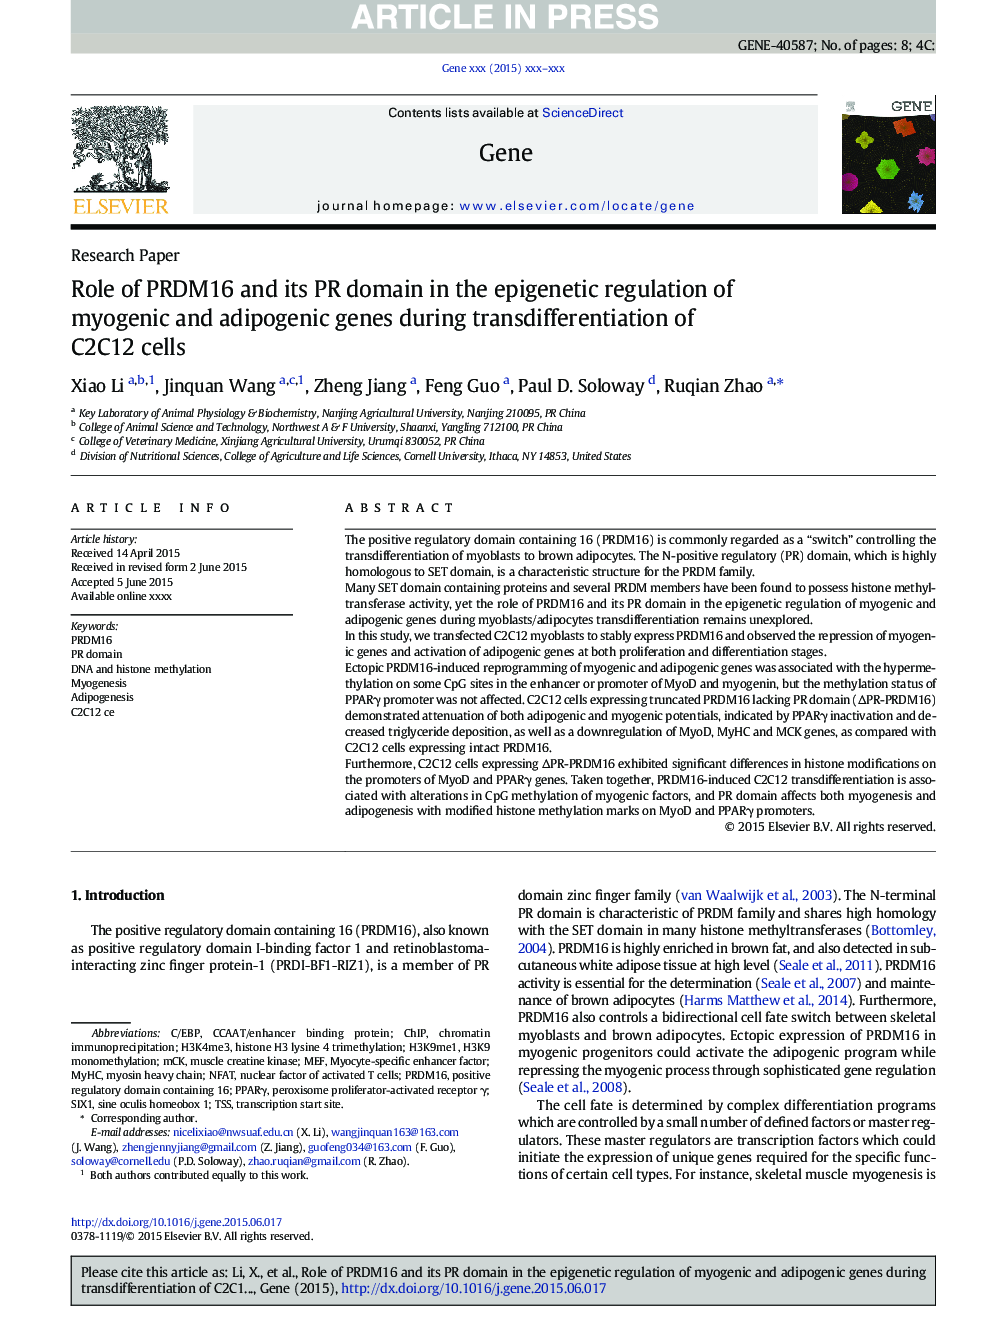 Role of PRDM16 and its PR domain in the epigenetic regulation of myogenic and adipogenic genes during transdifferentiation of C2C12 cells